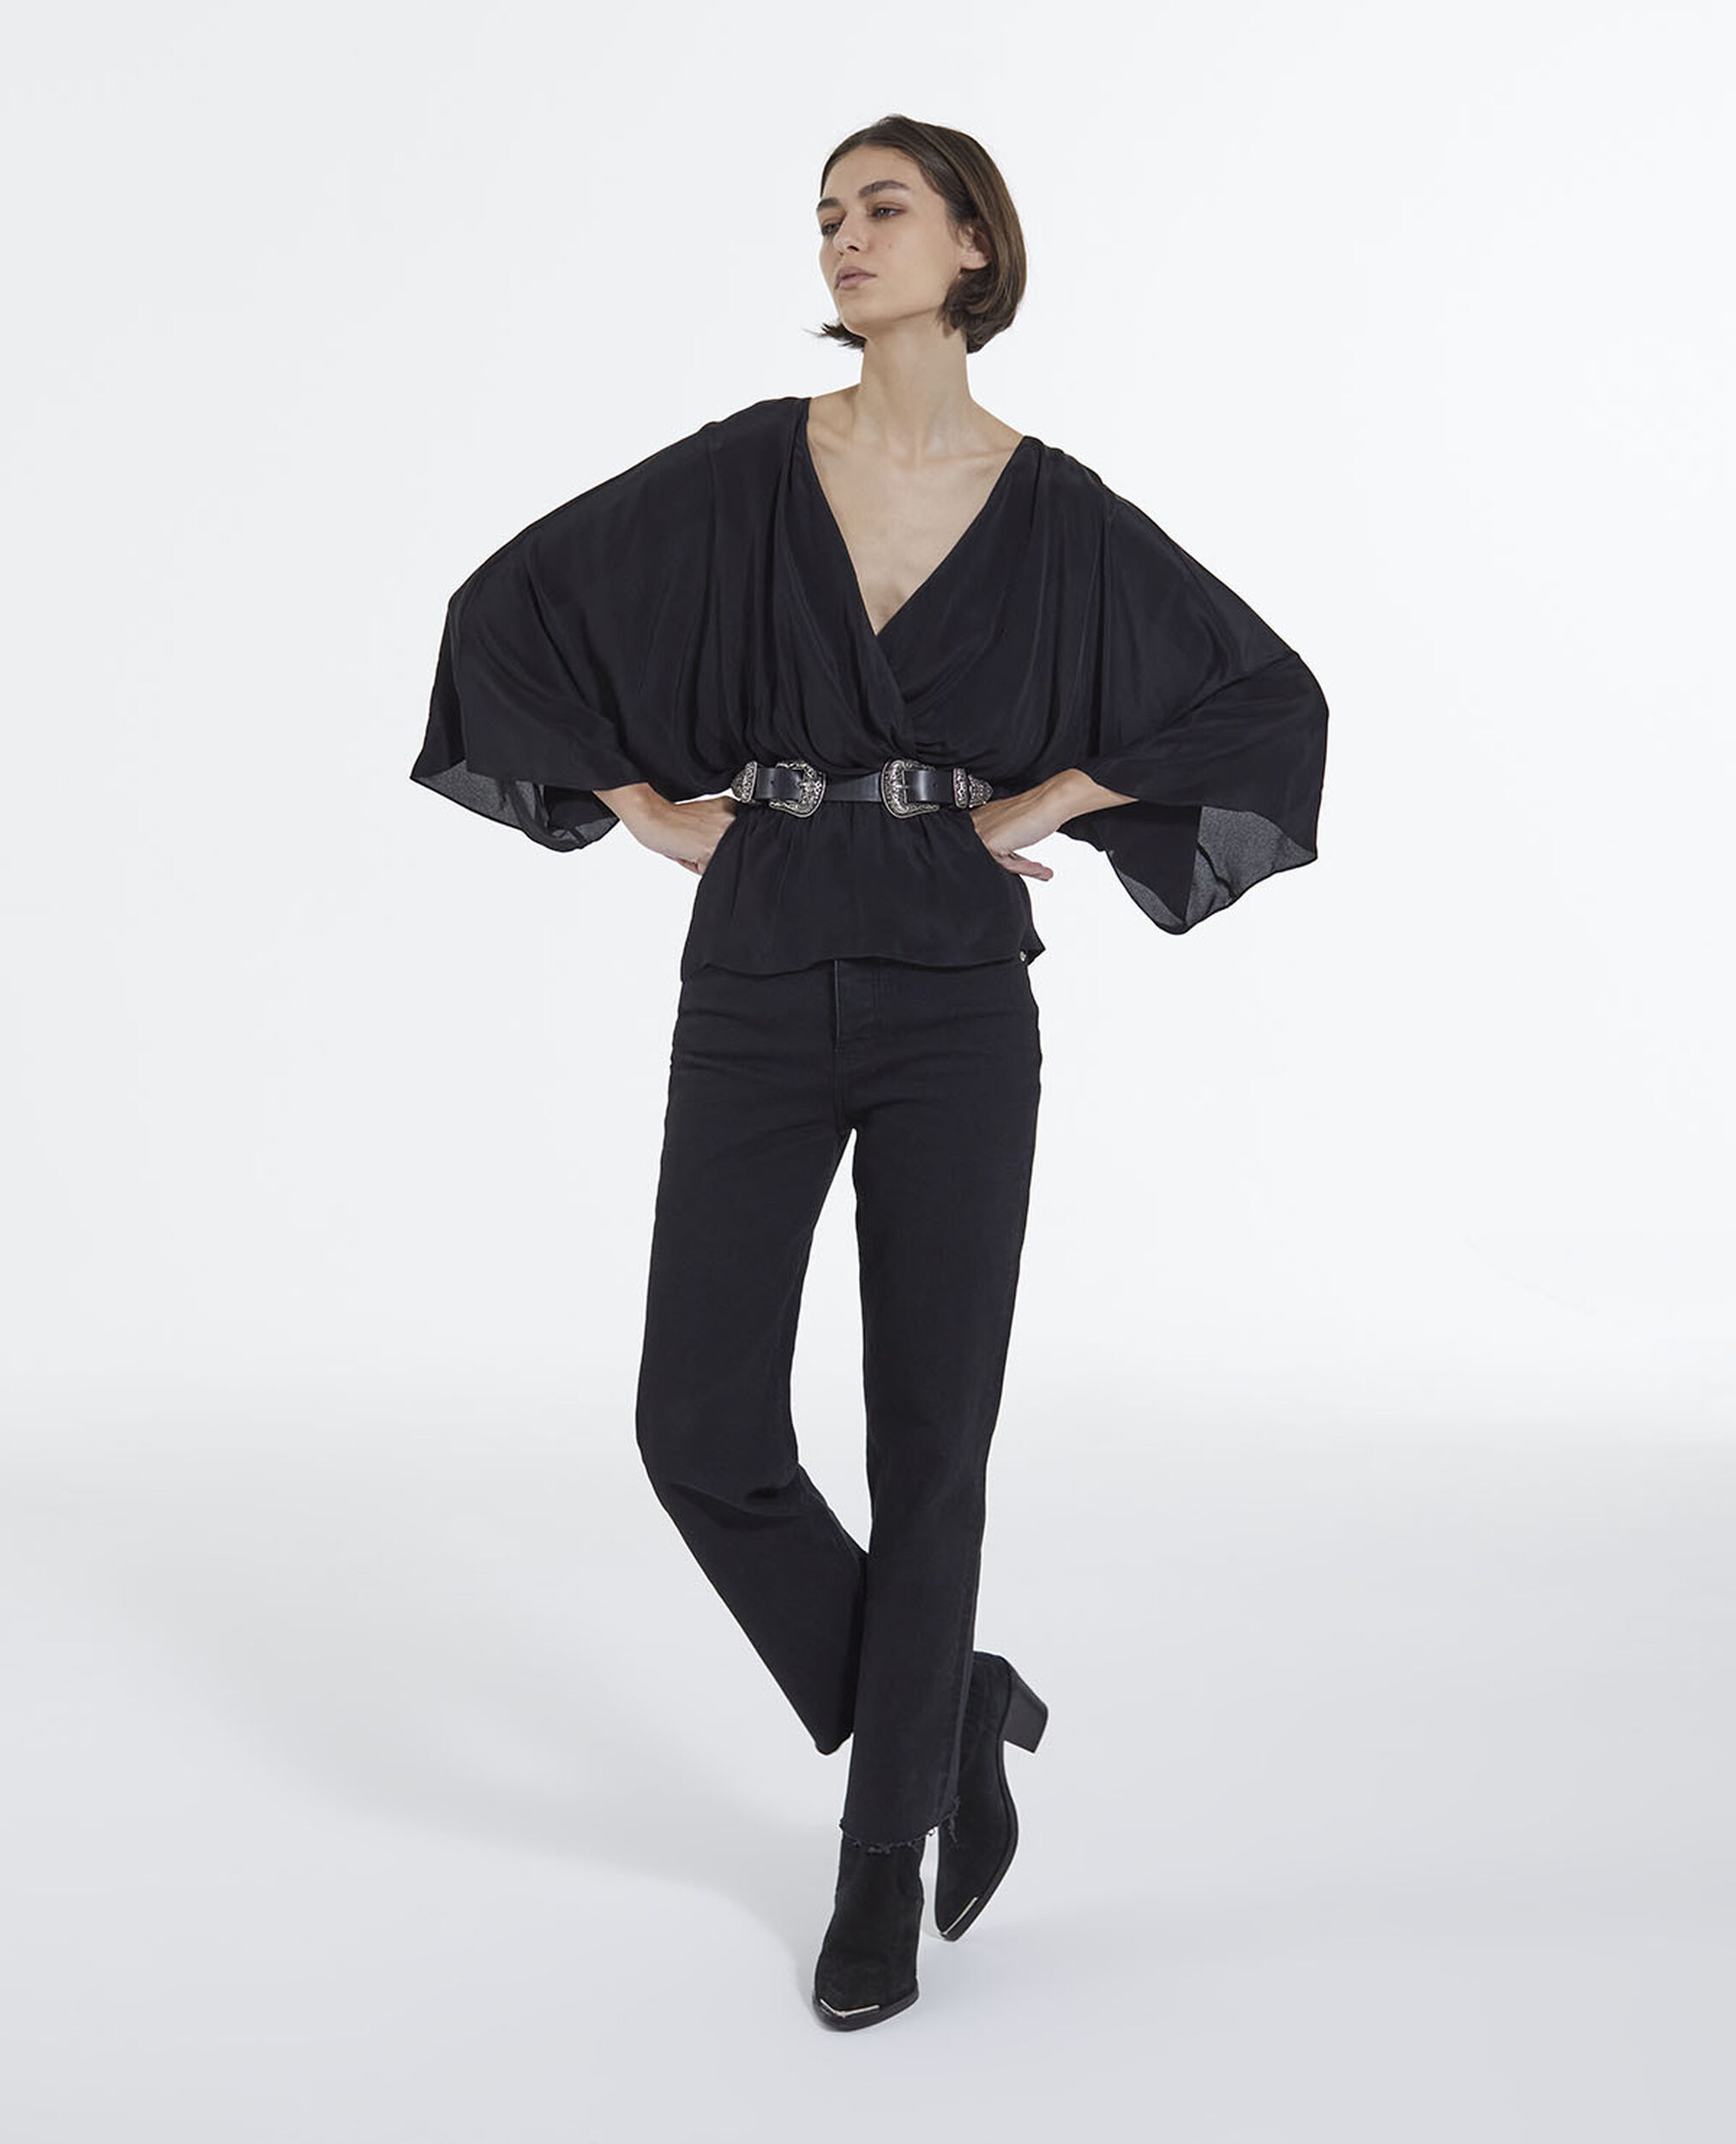 Black kimono top with long draped sleeves, BLACK, hi-res image number null